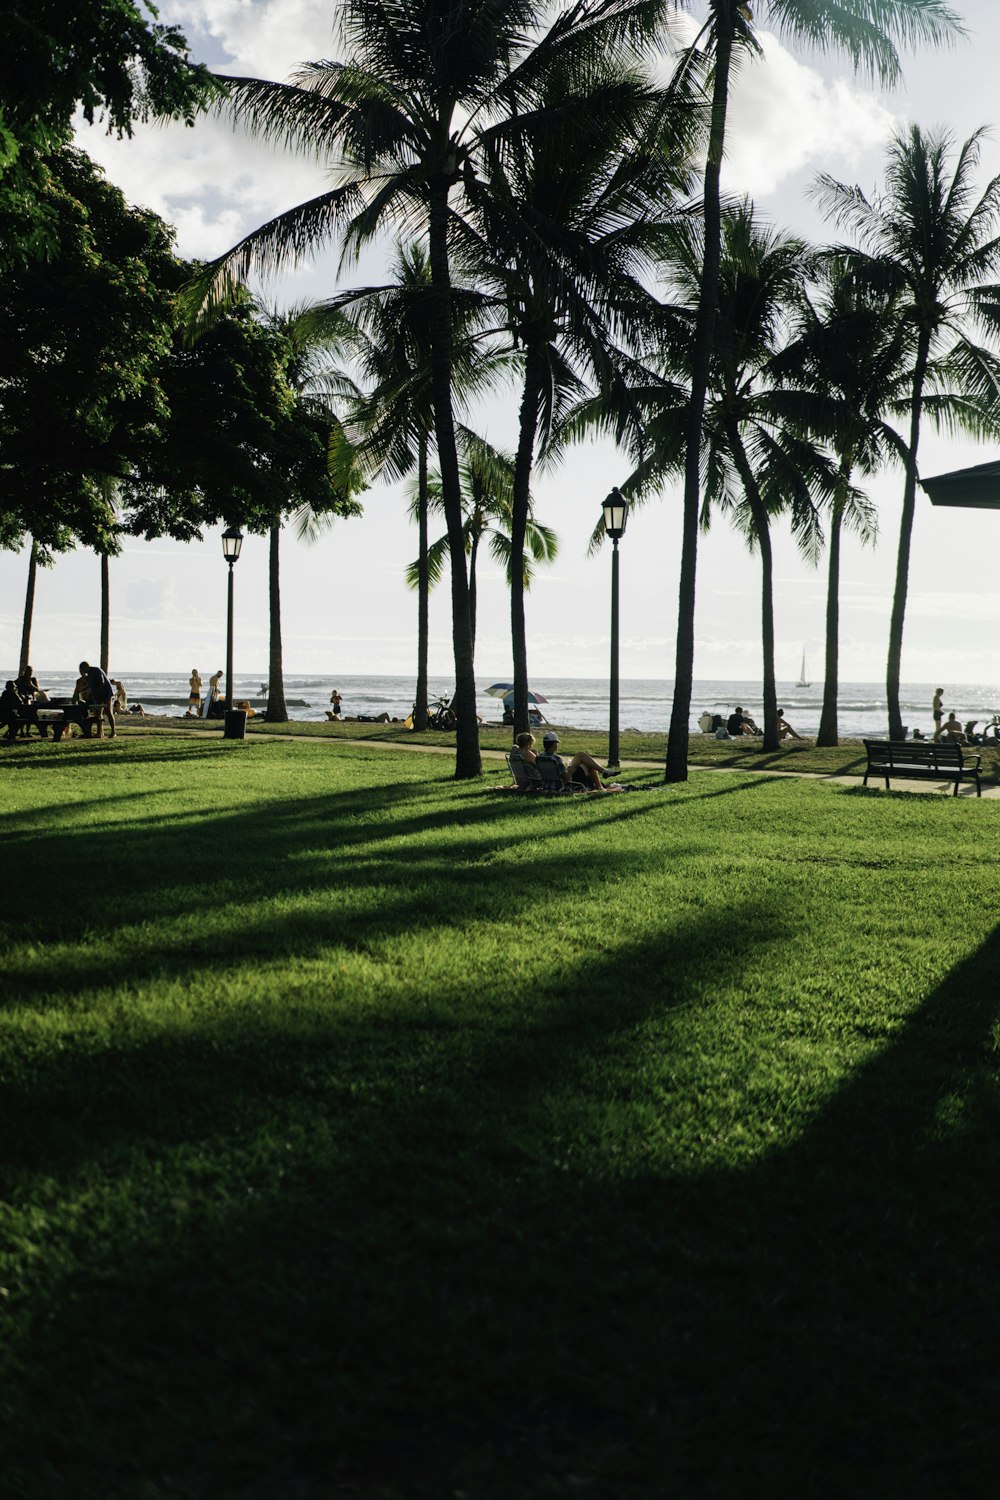 people sitting on bench near palm trees during daytime